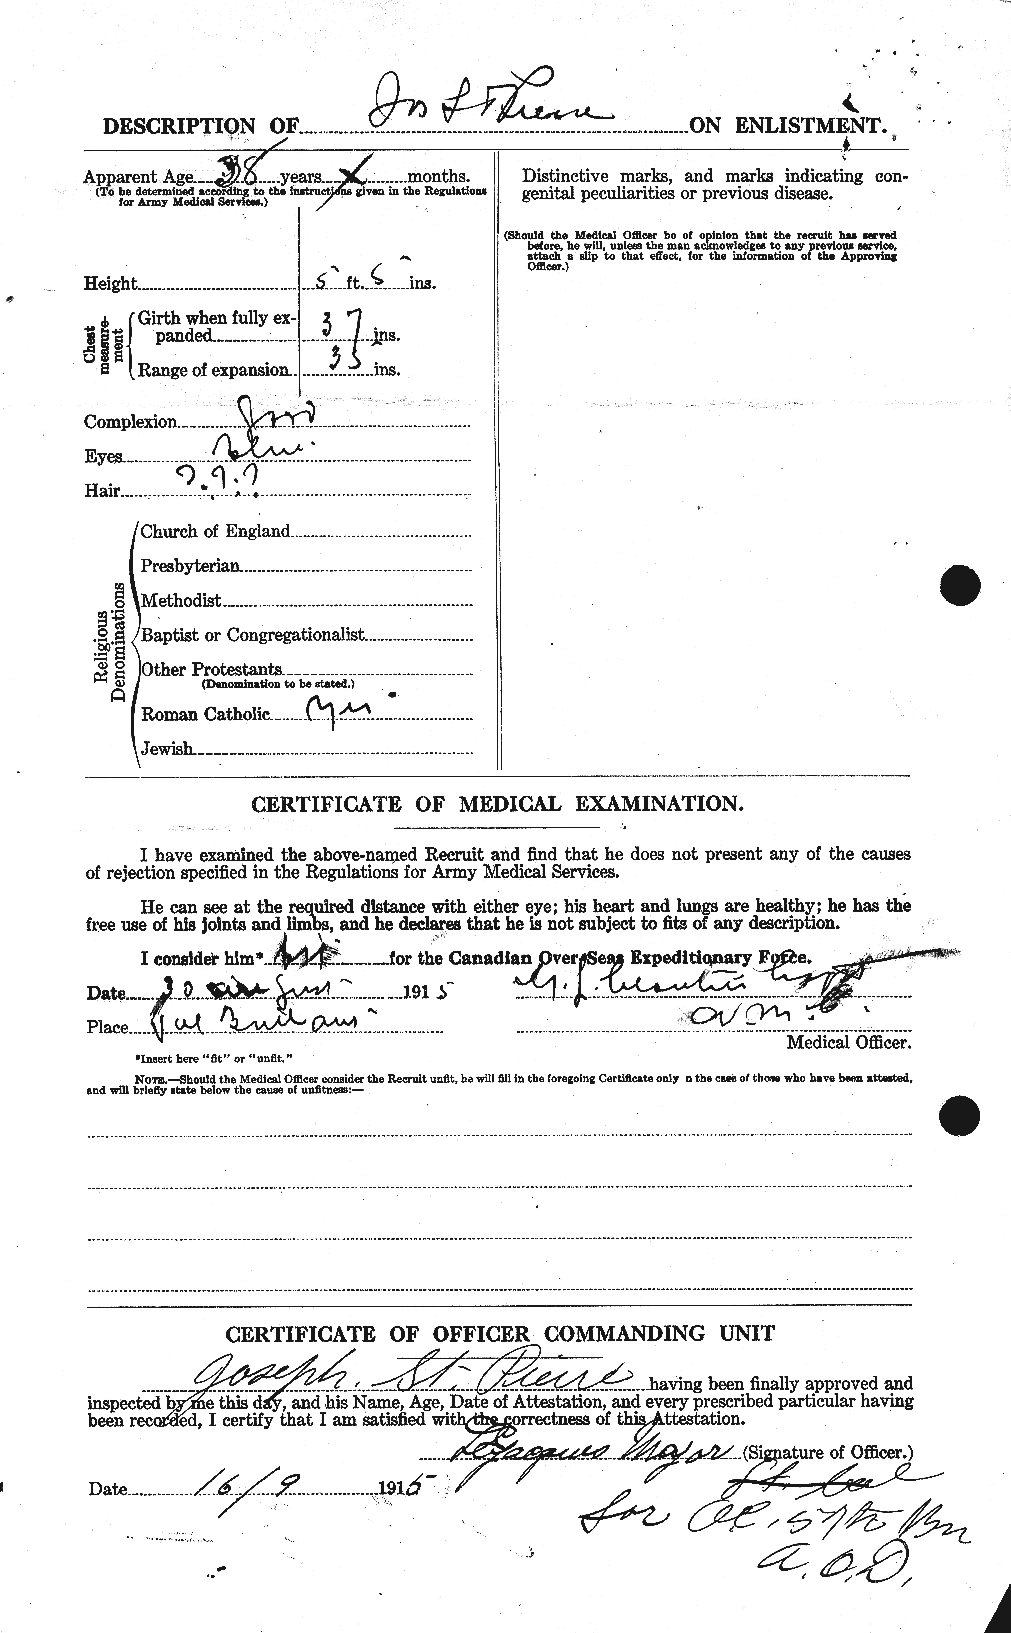 Personnel Records of the First World War - CEF 077680b